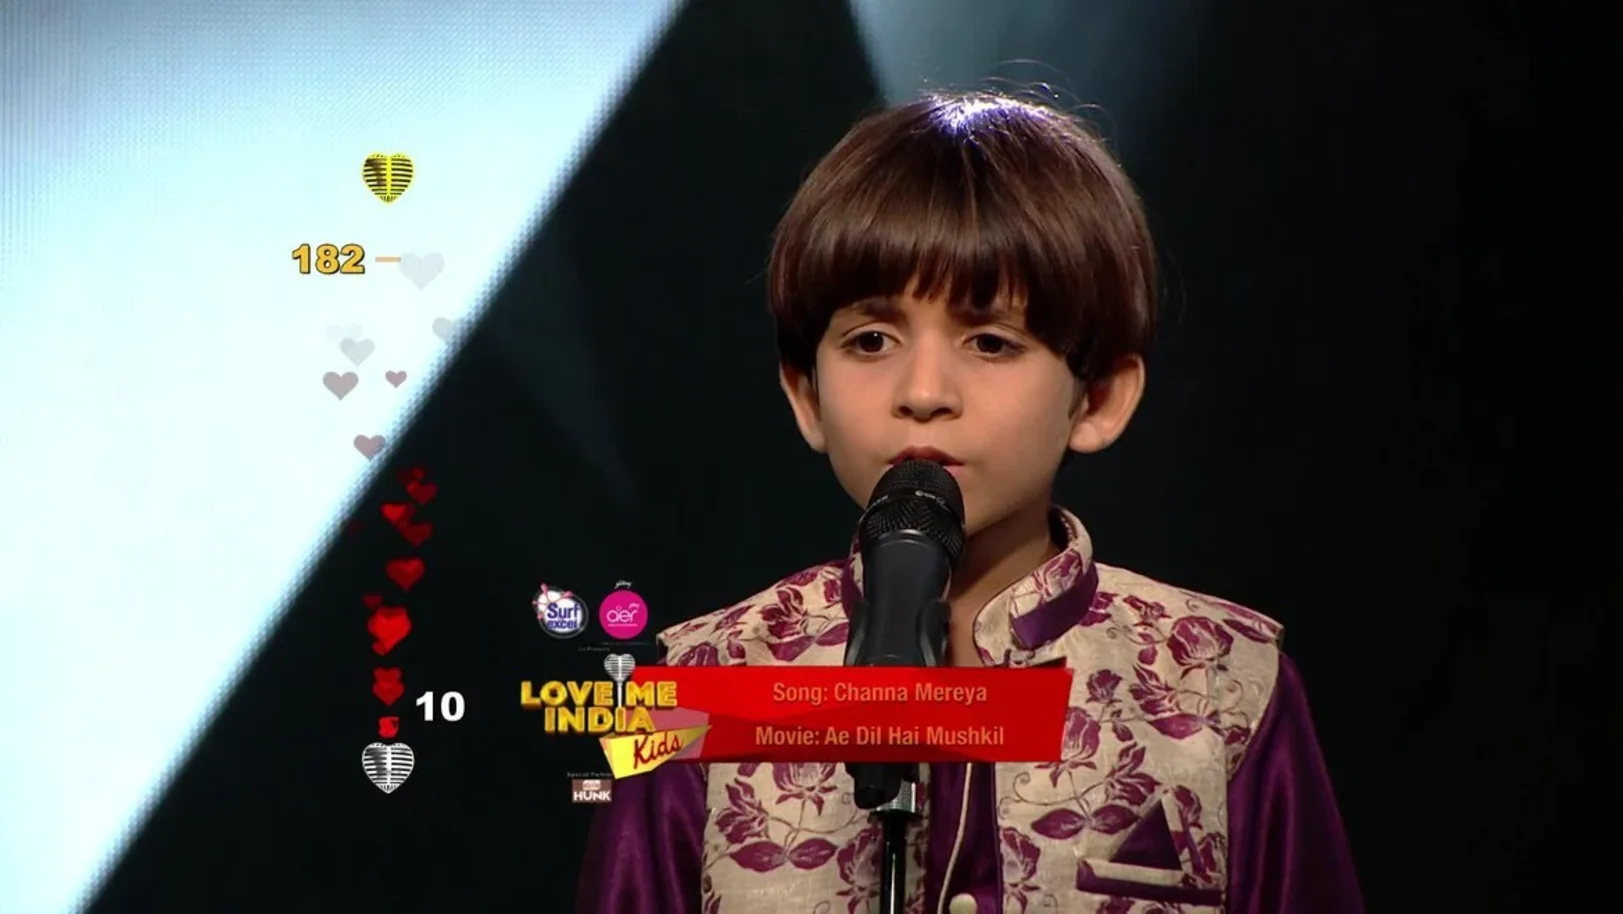 Atharva Chaturvedi’s nervous yet cute performance - Love Me India Kids Highlights 